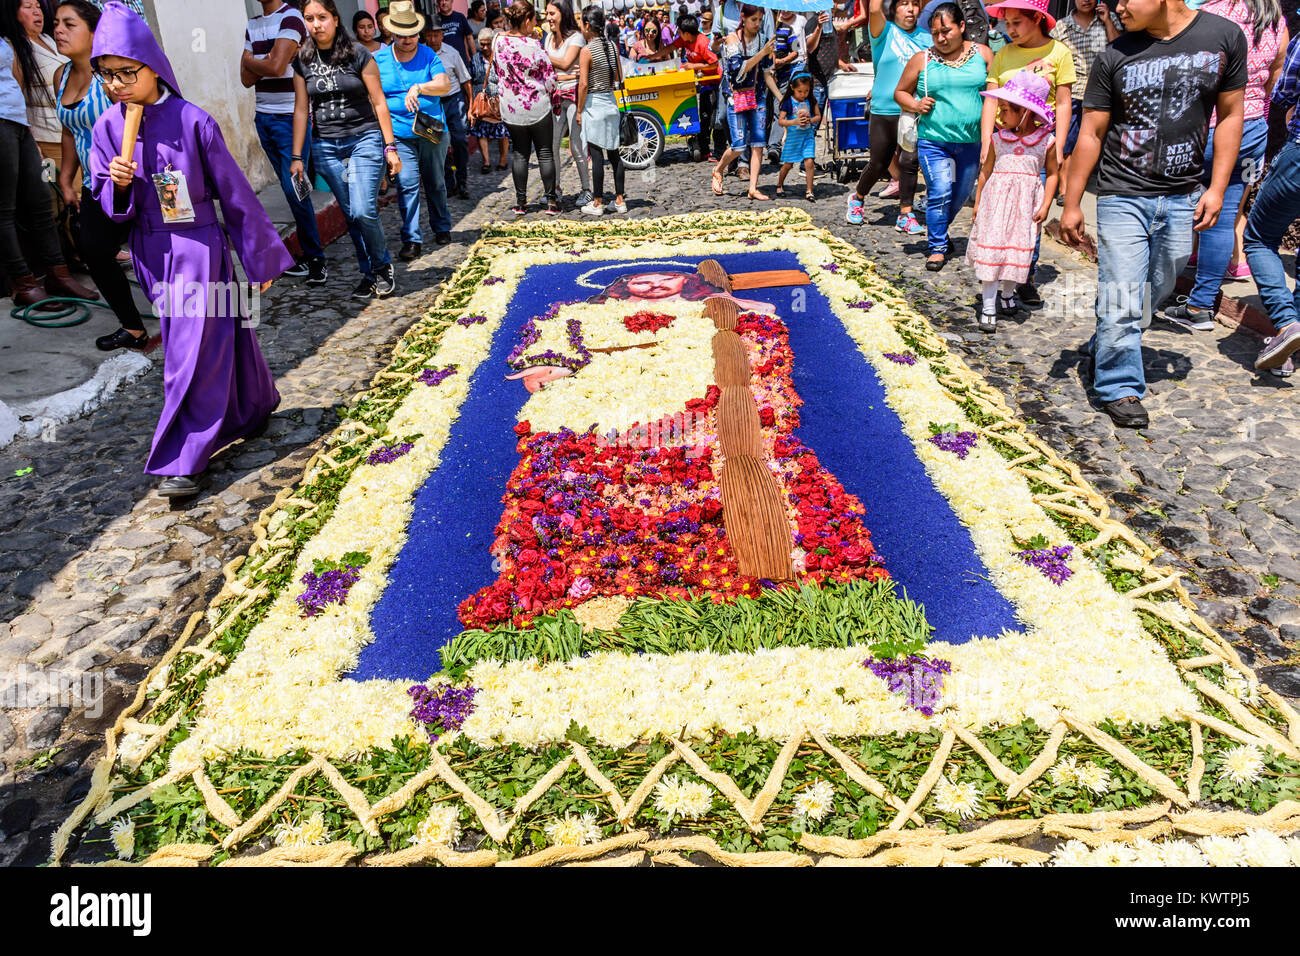 Antigua, Guatemala -  March 26, 2017: Dyed sawdust & flower procession carpet in town with most famous Holy Week celebrations in Latin America Stock Photo